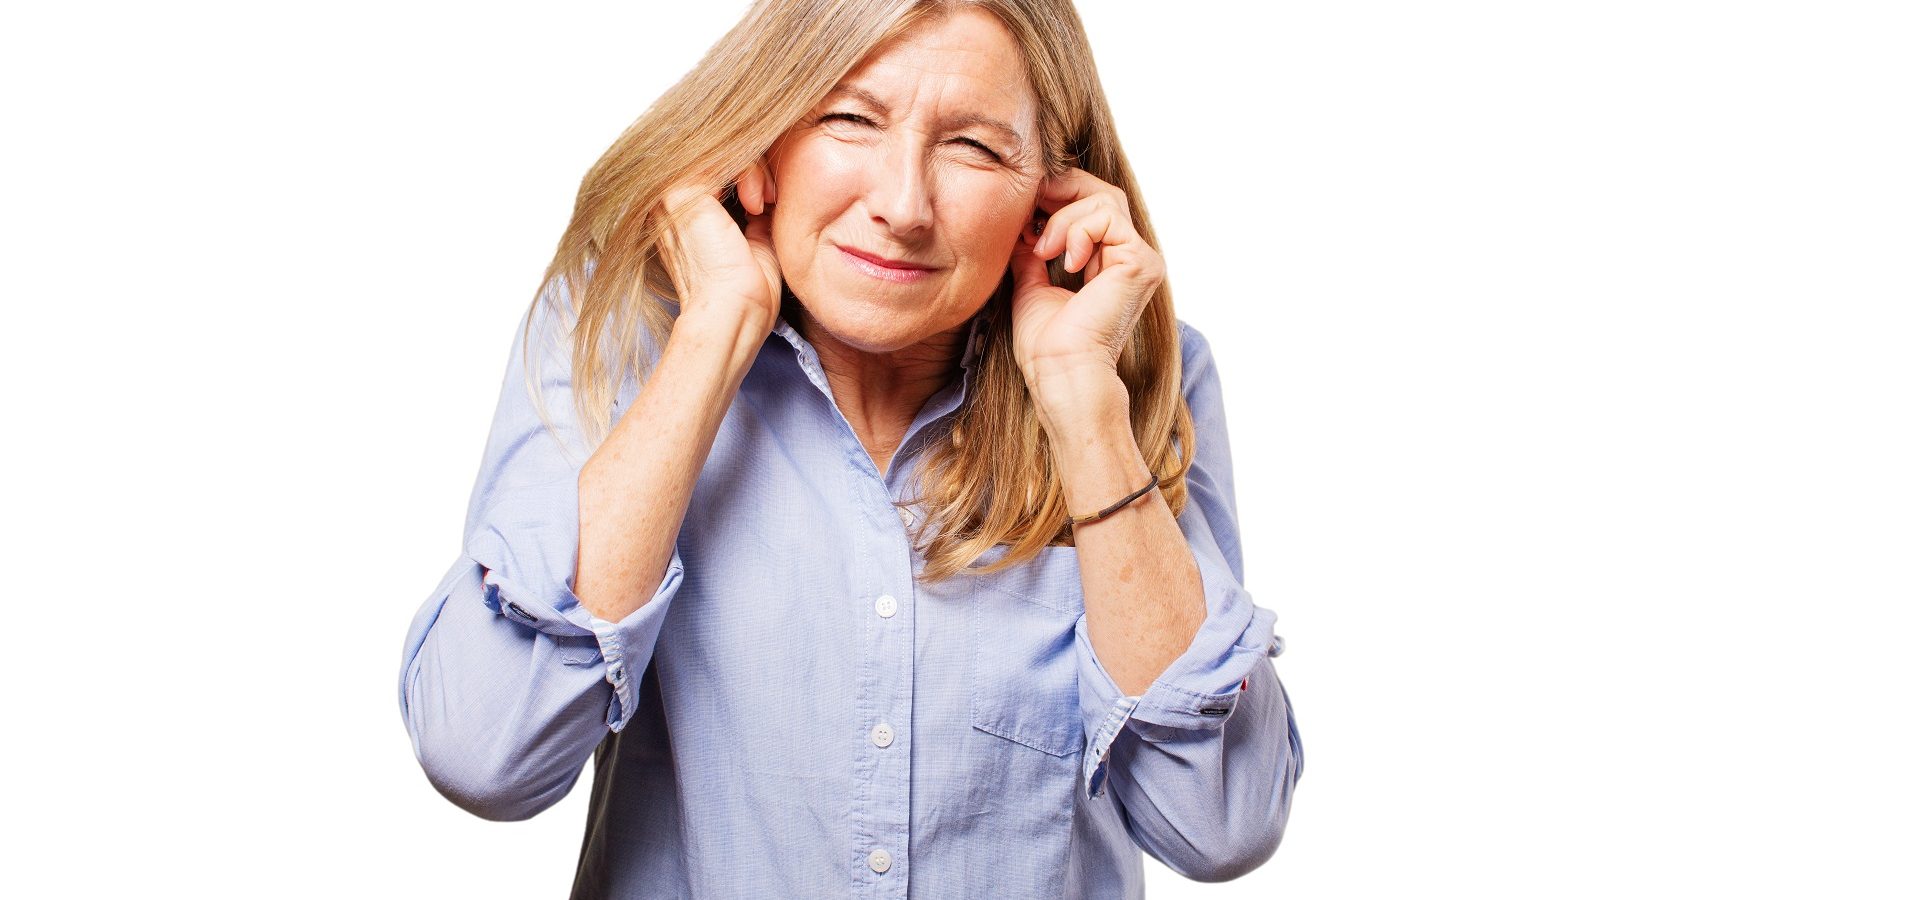 Senior woman covering her ears because of hearing aid feedback noise